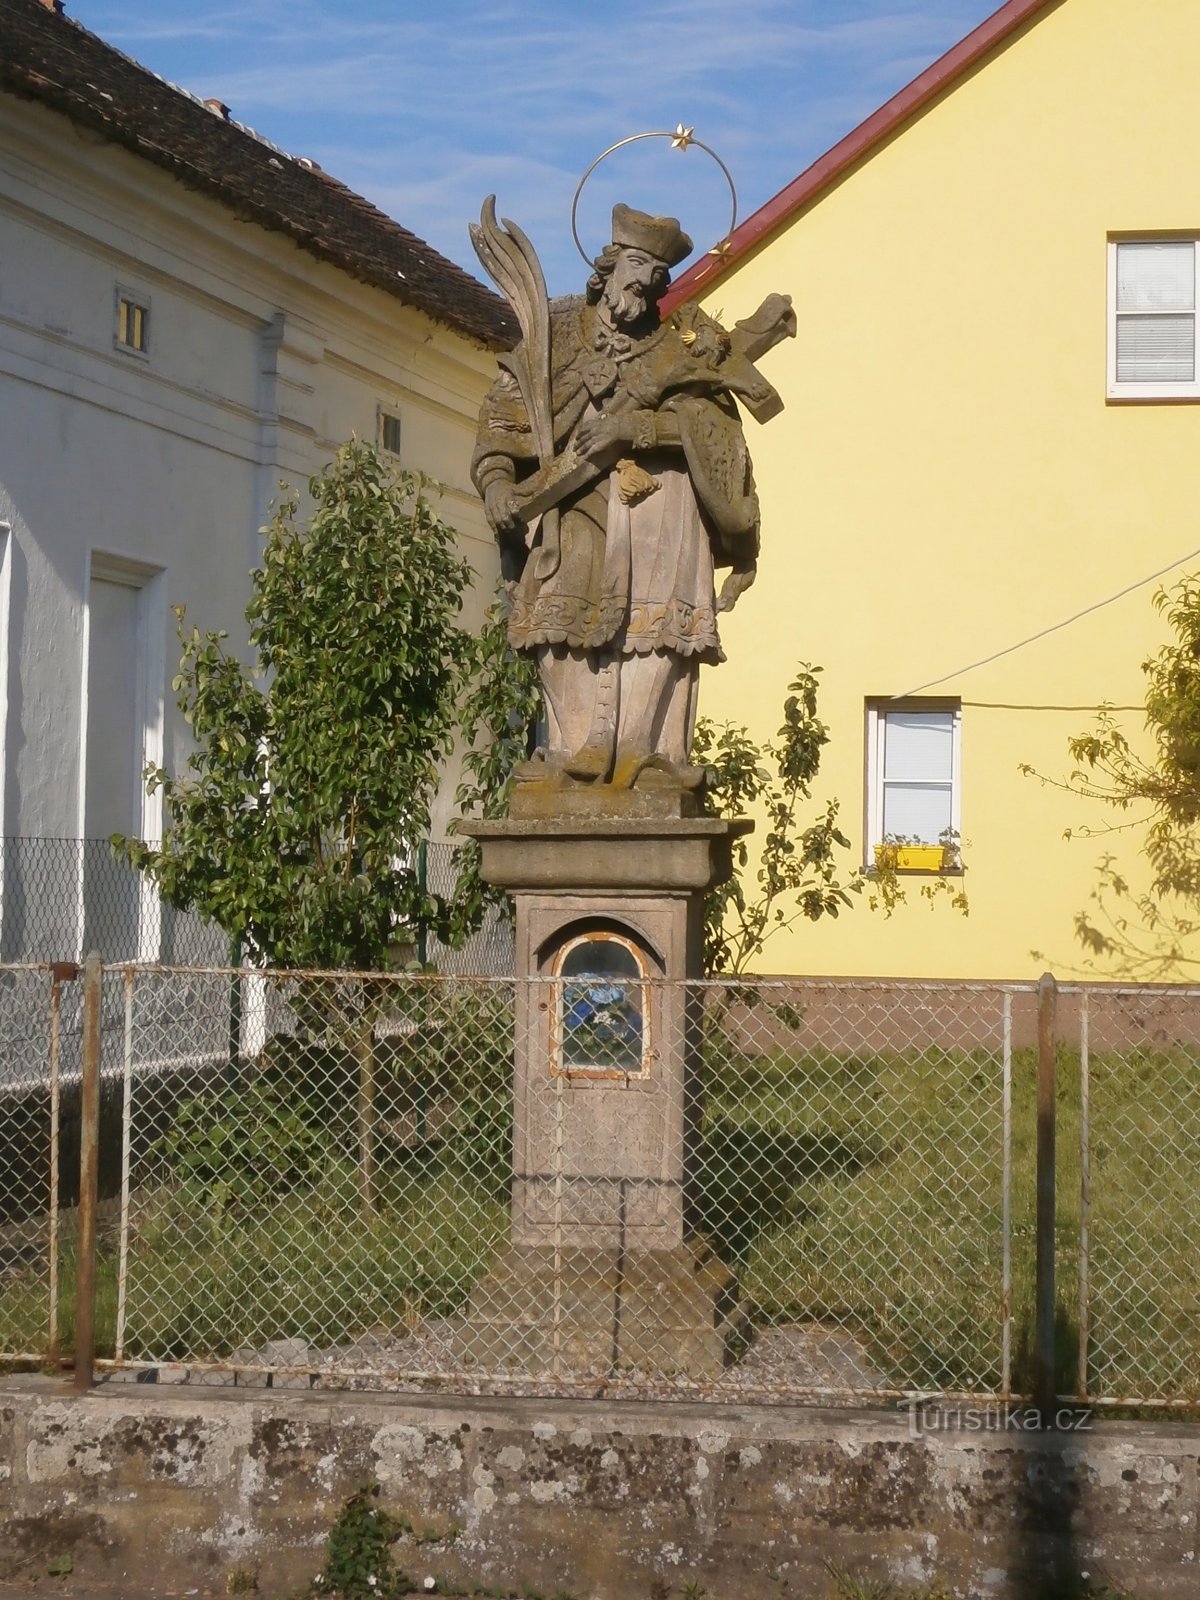 Statue of St. John of Nepomuck, which was previously accompanied by the original belfry (Černožice